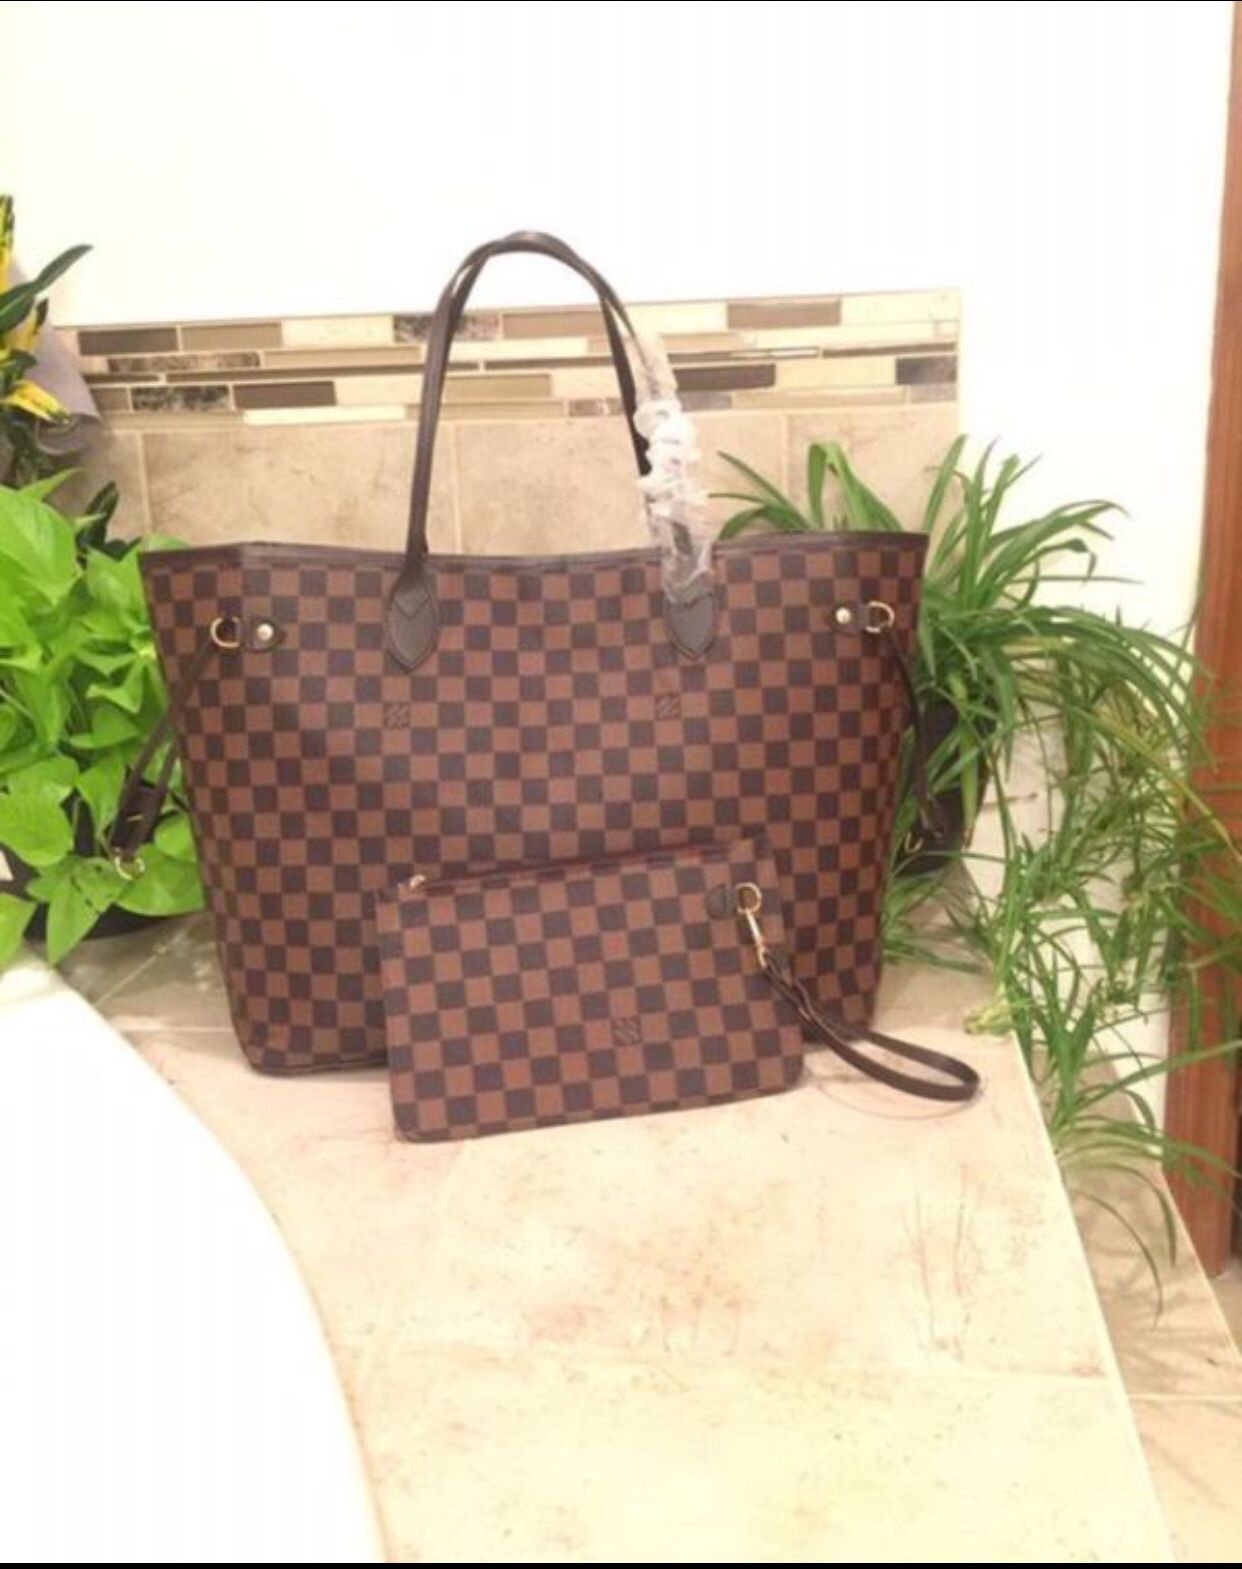 Large Brown checkered tote purse handbag with Wristlet